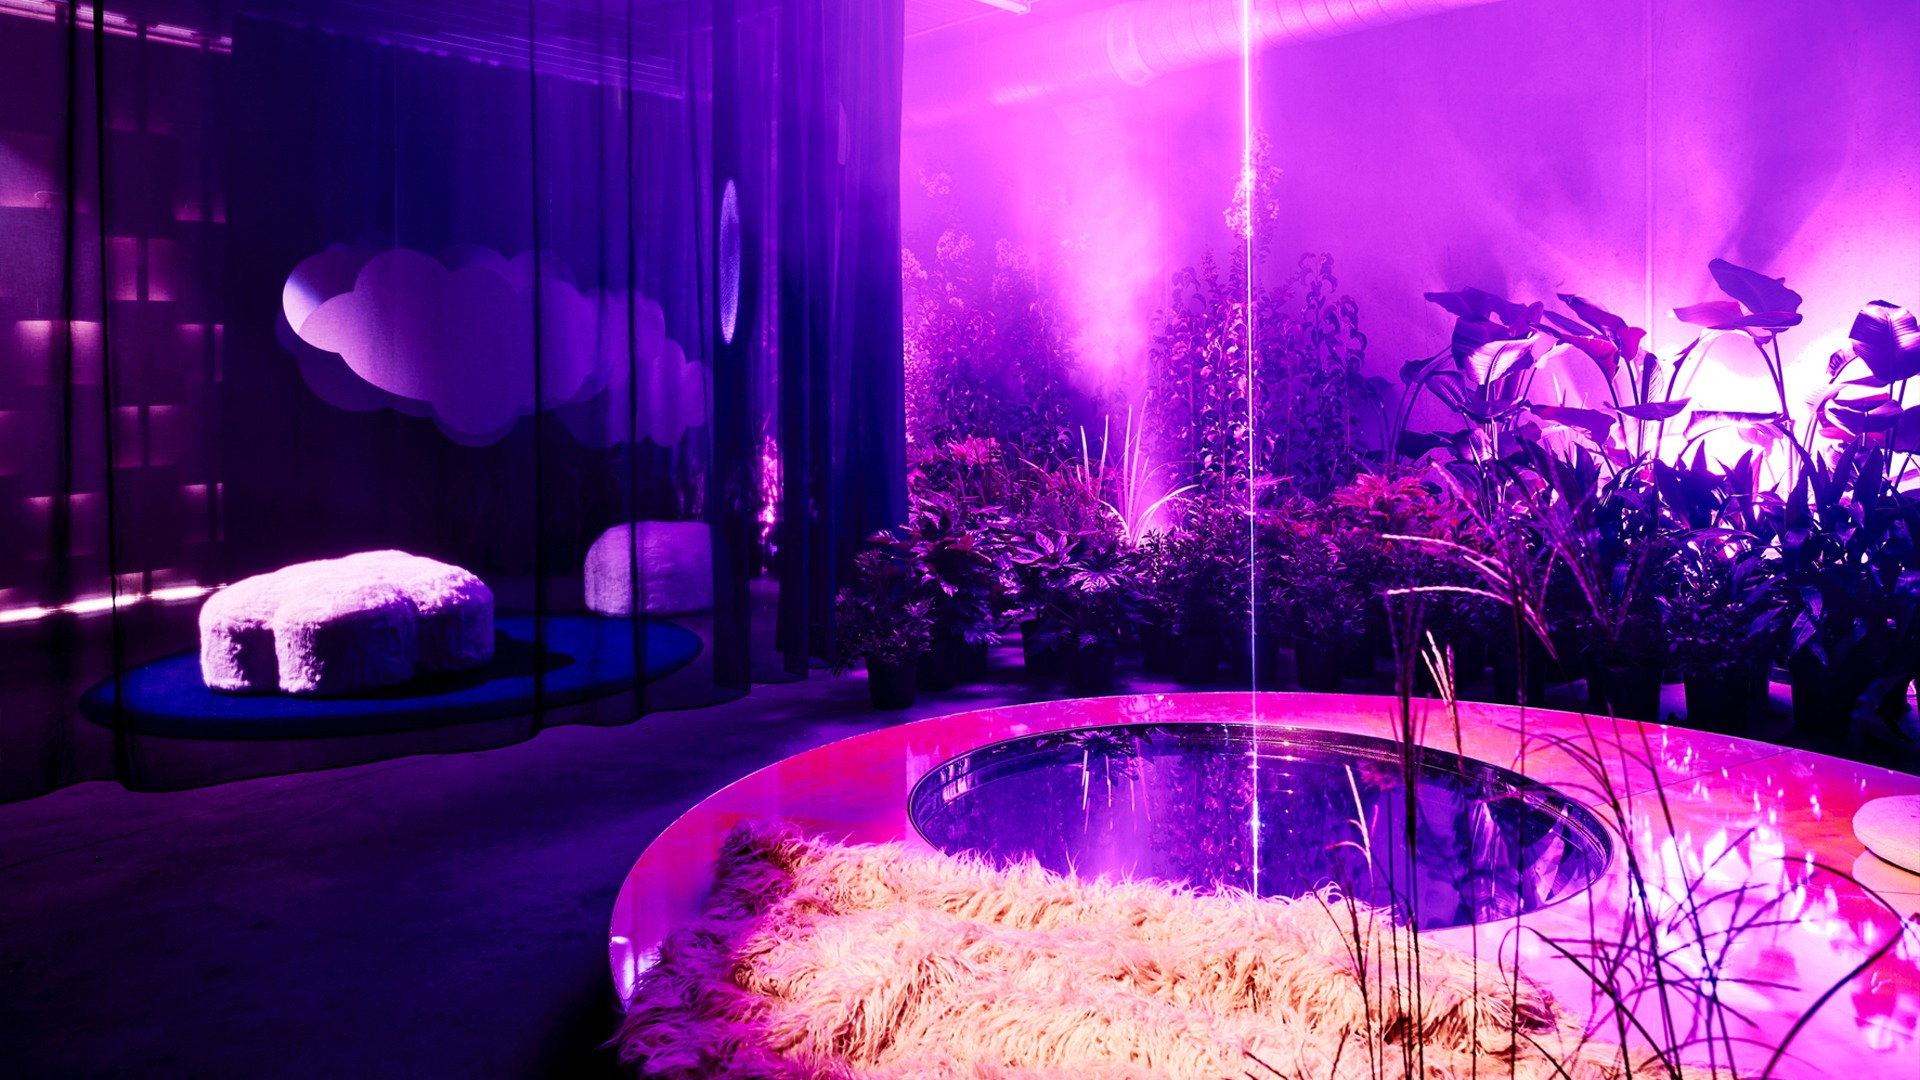 An interior scene with purple lighting, a circular reflection pool and indoor plants.